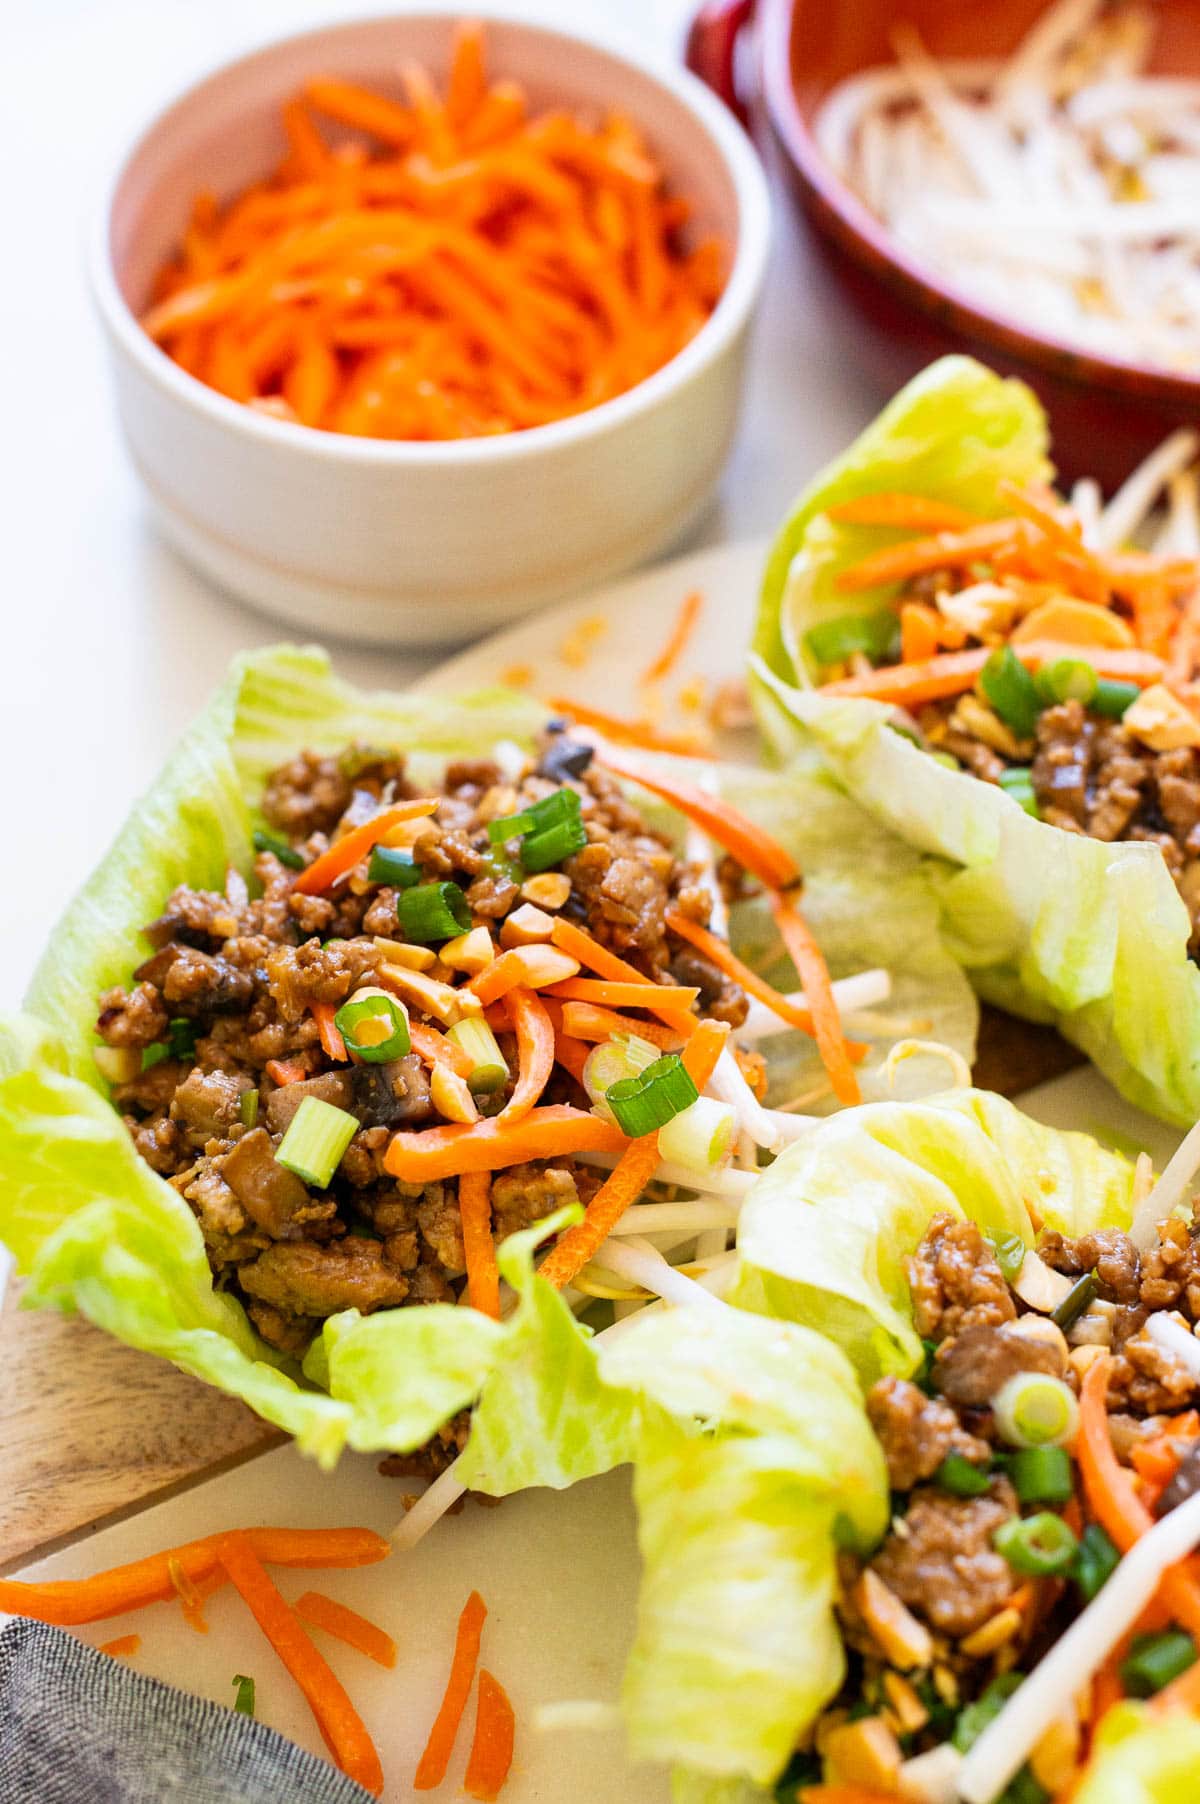 Asian turkey lettuce wraps garnished with green onion and peanuts and served on a platter.